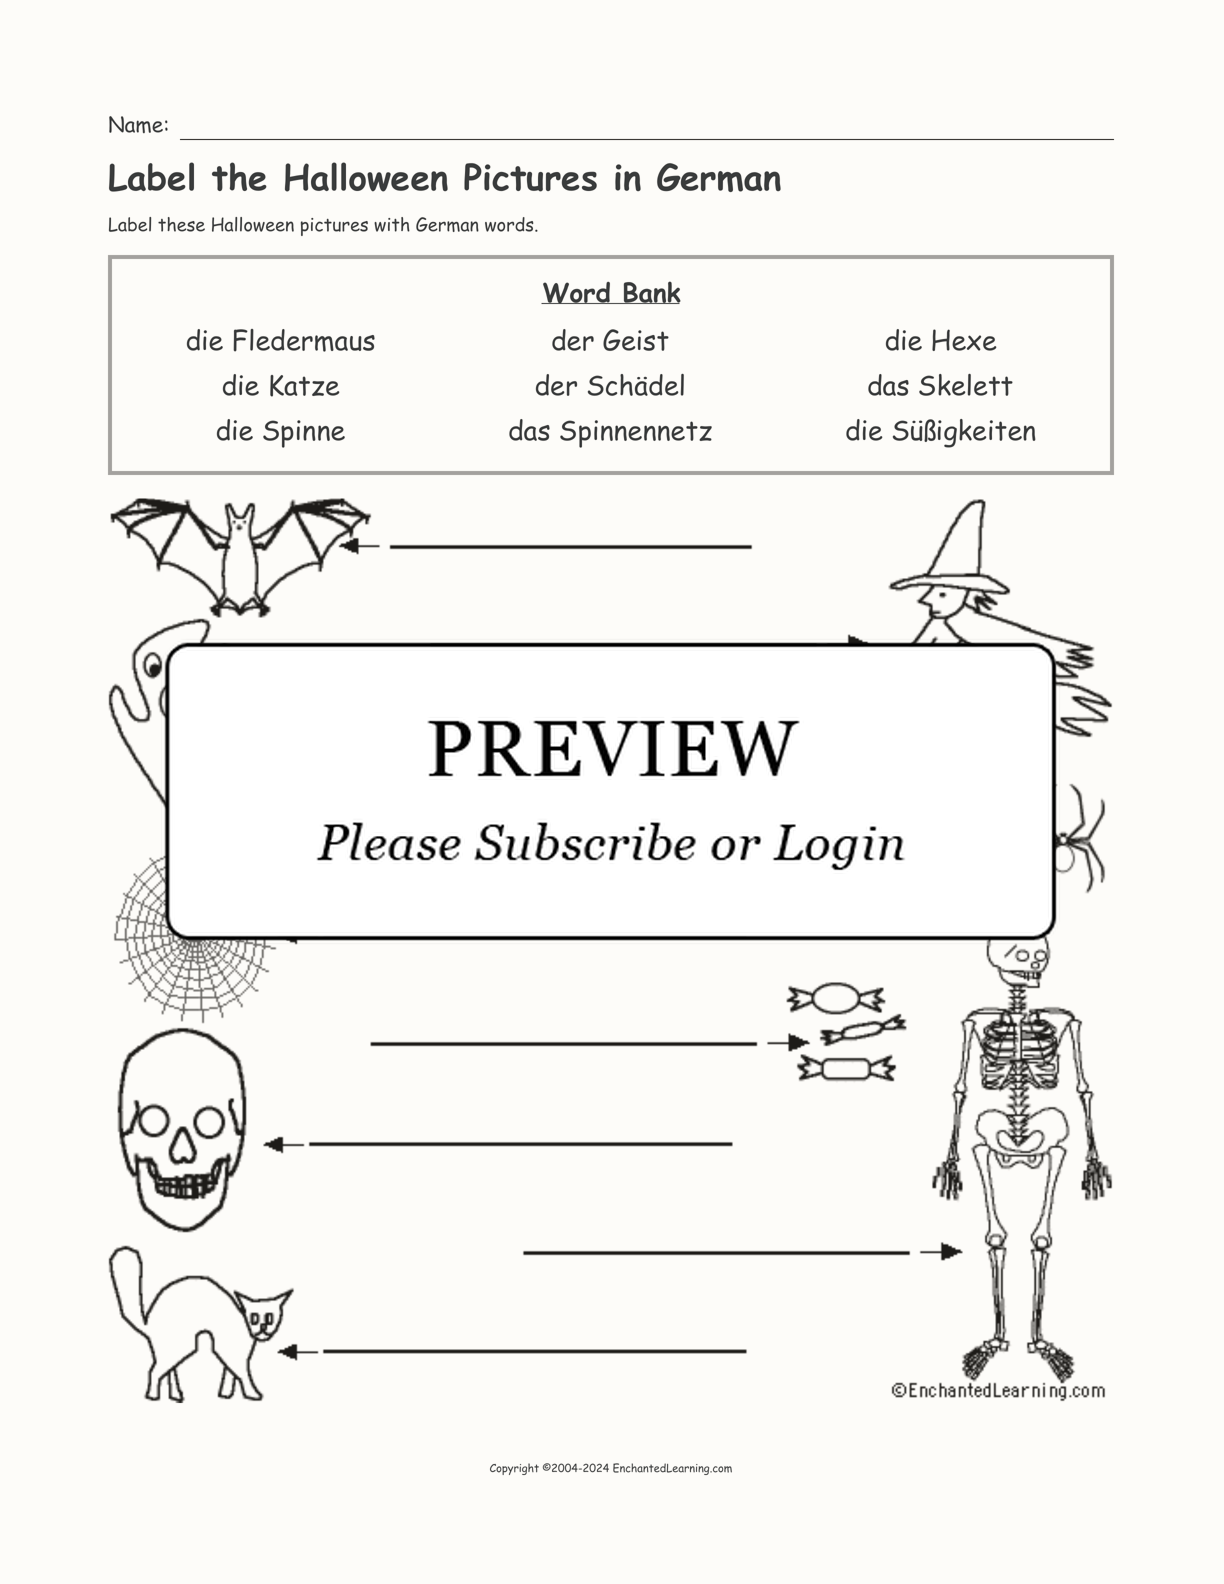 Label the Halloween Pictures in German interactive worksheet page 1